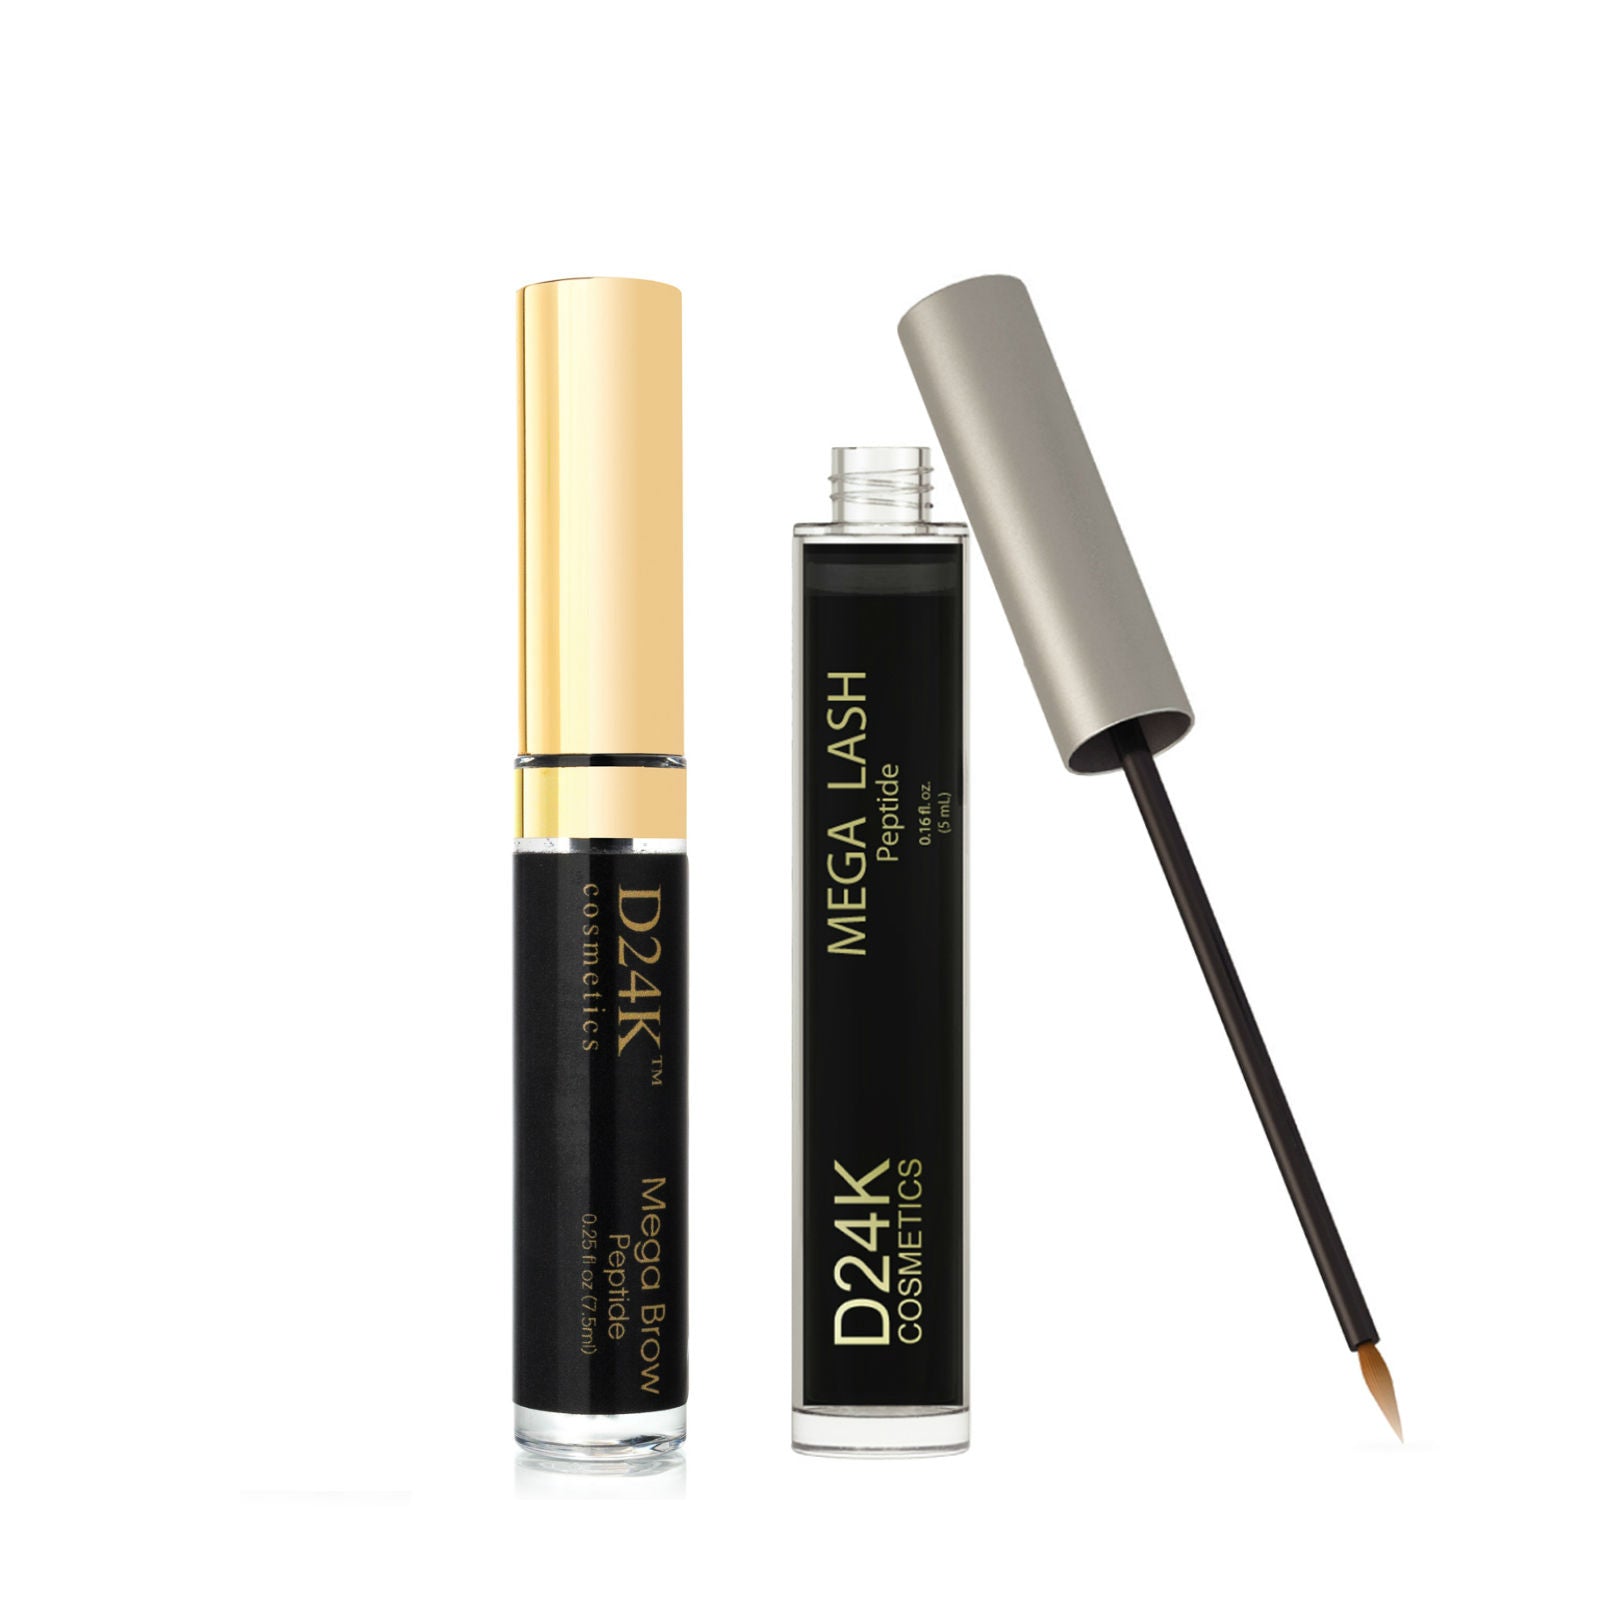 Your Best Brows and Lashes Duo:  Mega Lash Growth Peptide Treatment + Mega Brow Growth Peptide Treatment